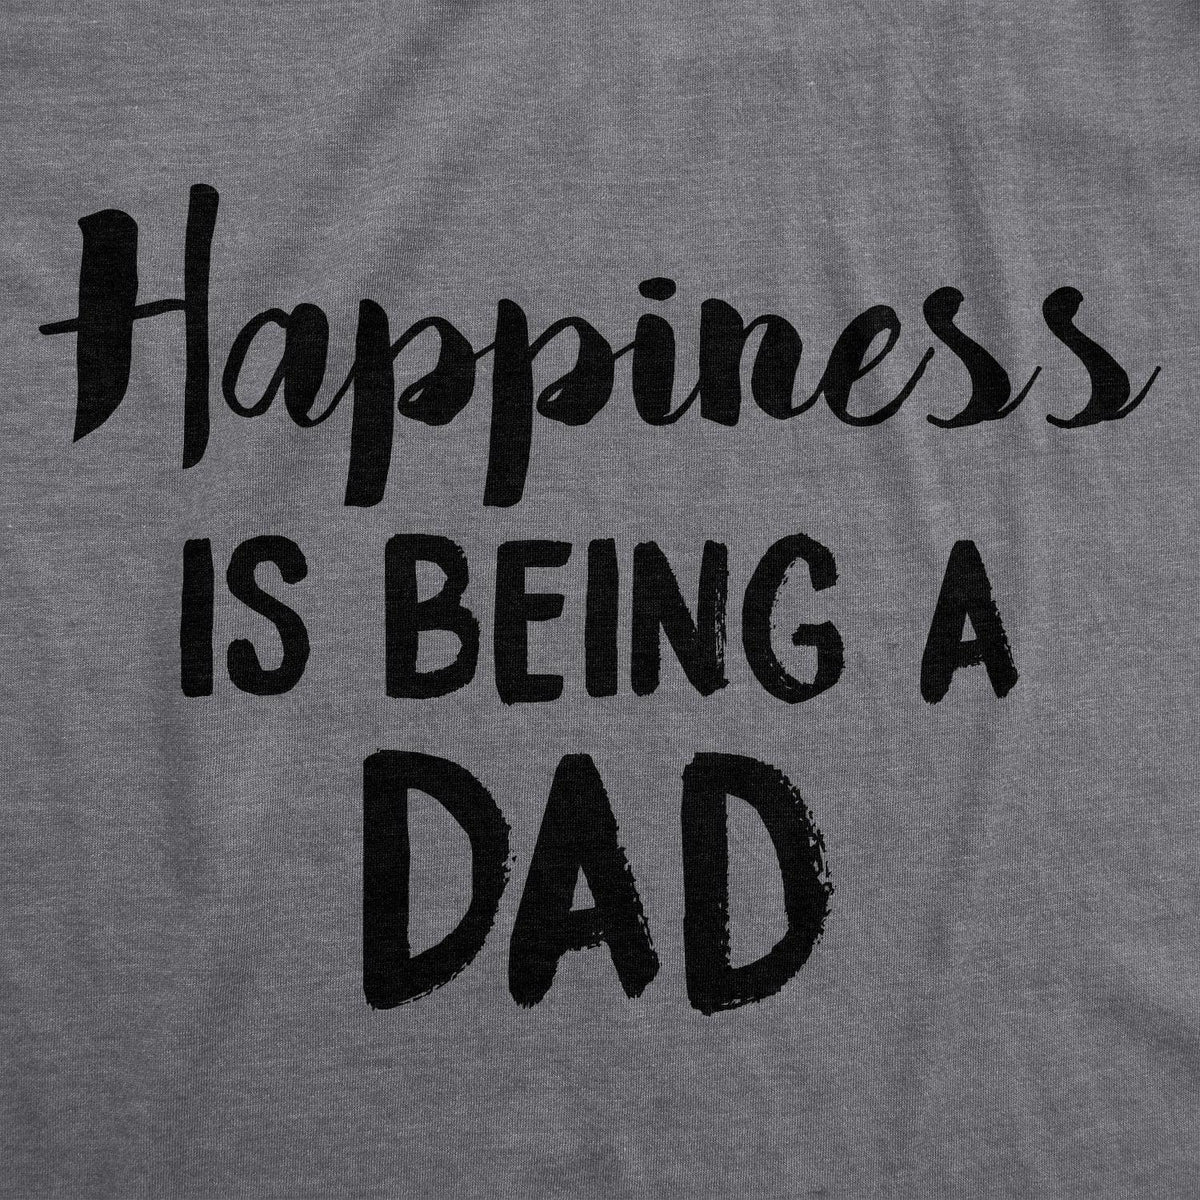 Happiness Is Being a Dad Men&#39;s Tshirt  -  Crazy Dog T-Shirts